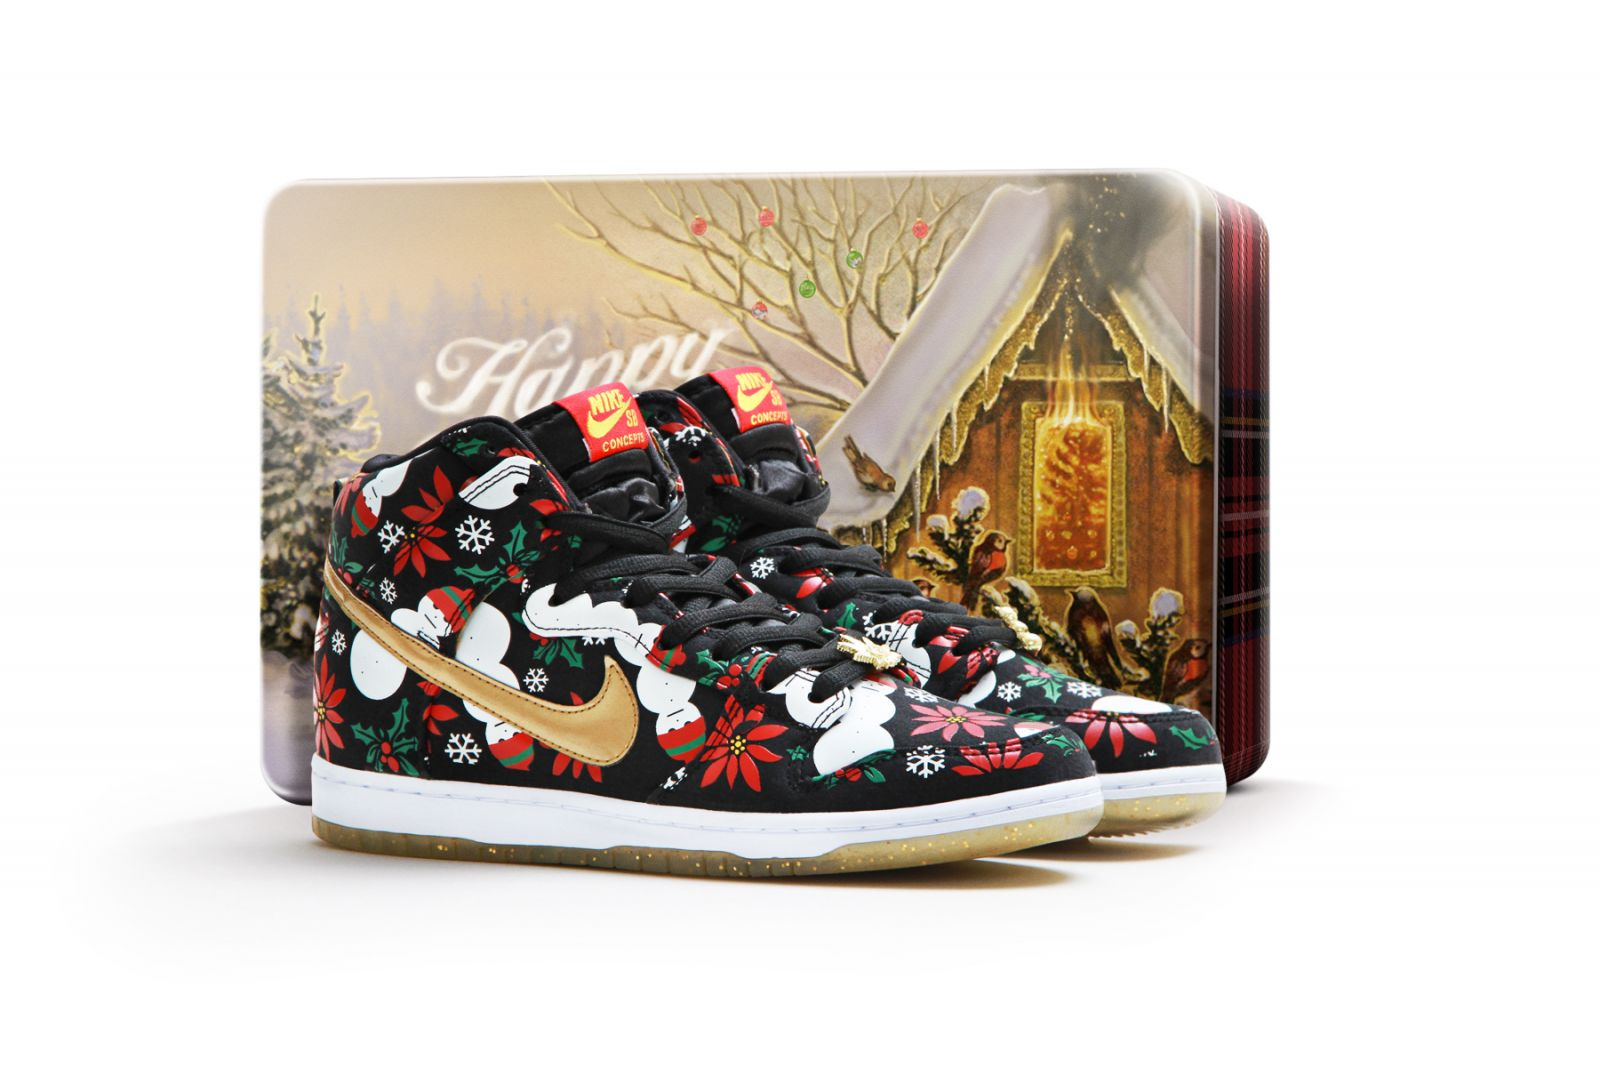 Nike Dunk SB High Concepts "Ugly Christmas Sweater" - Black (Special Box) sneakers